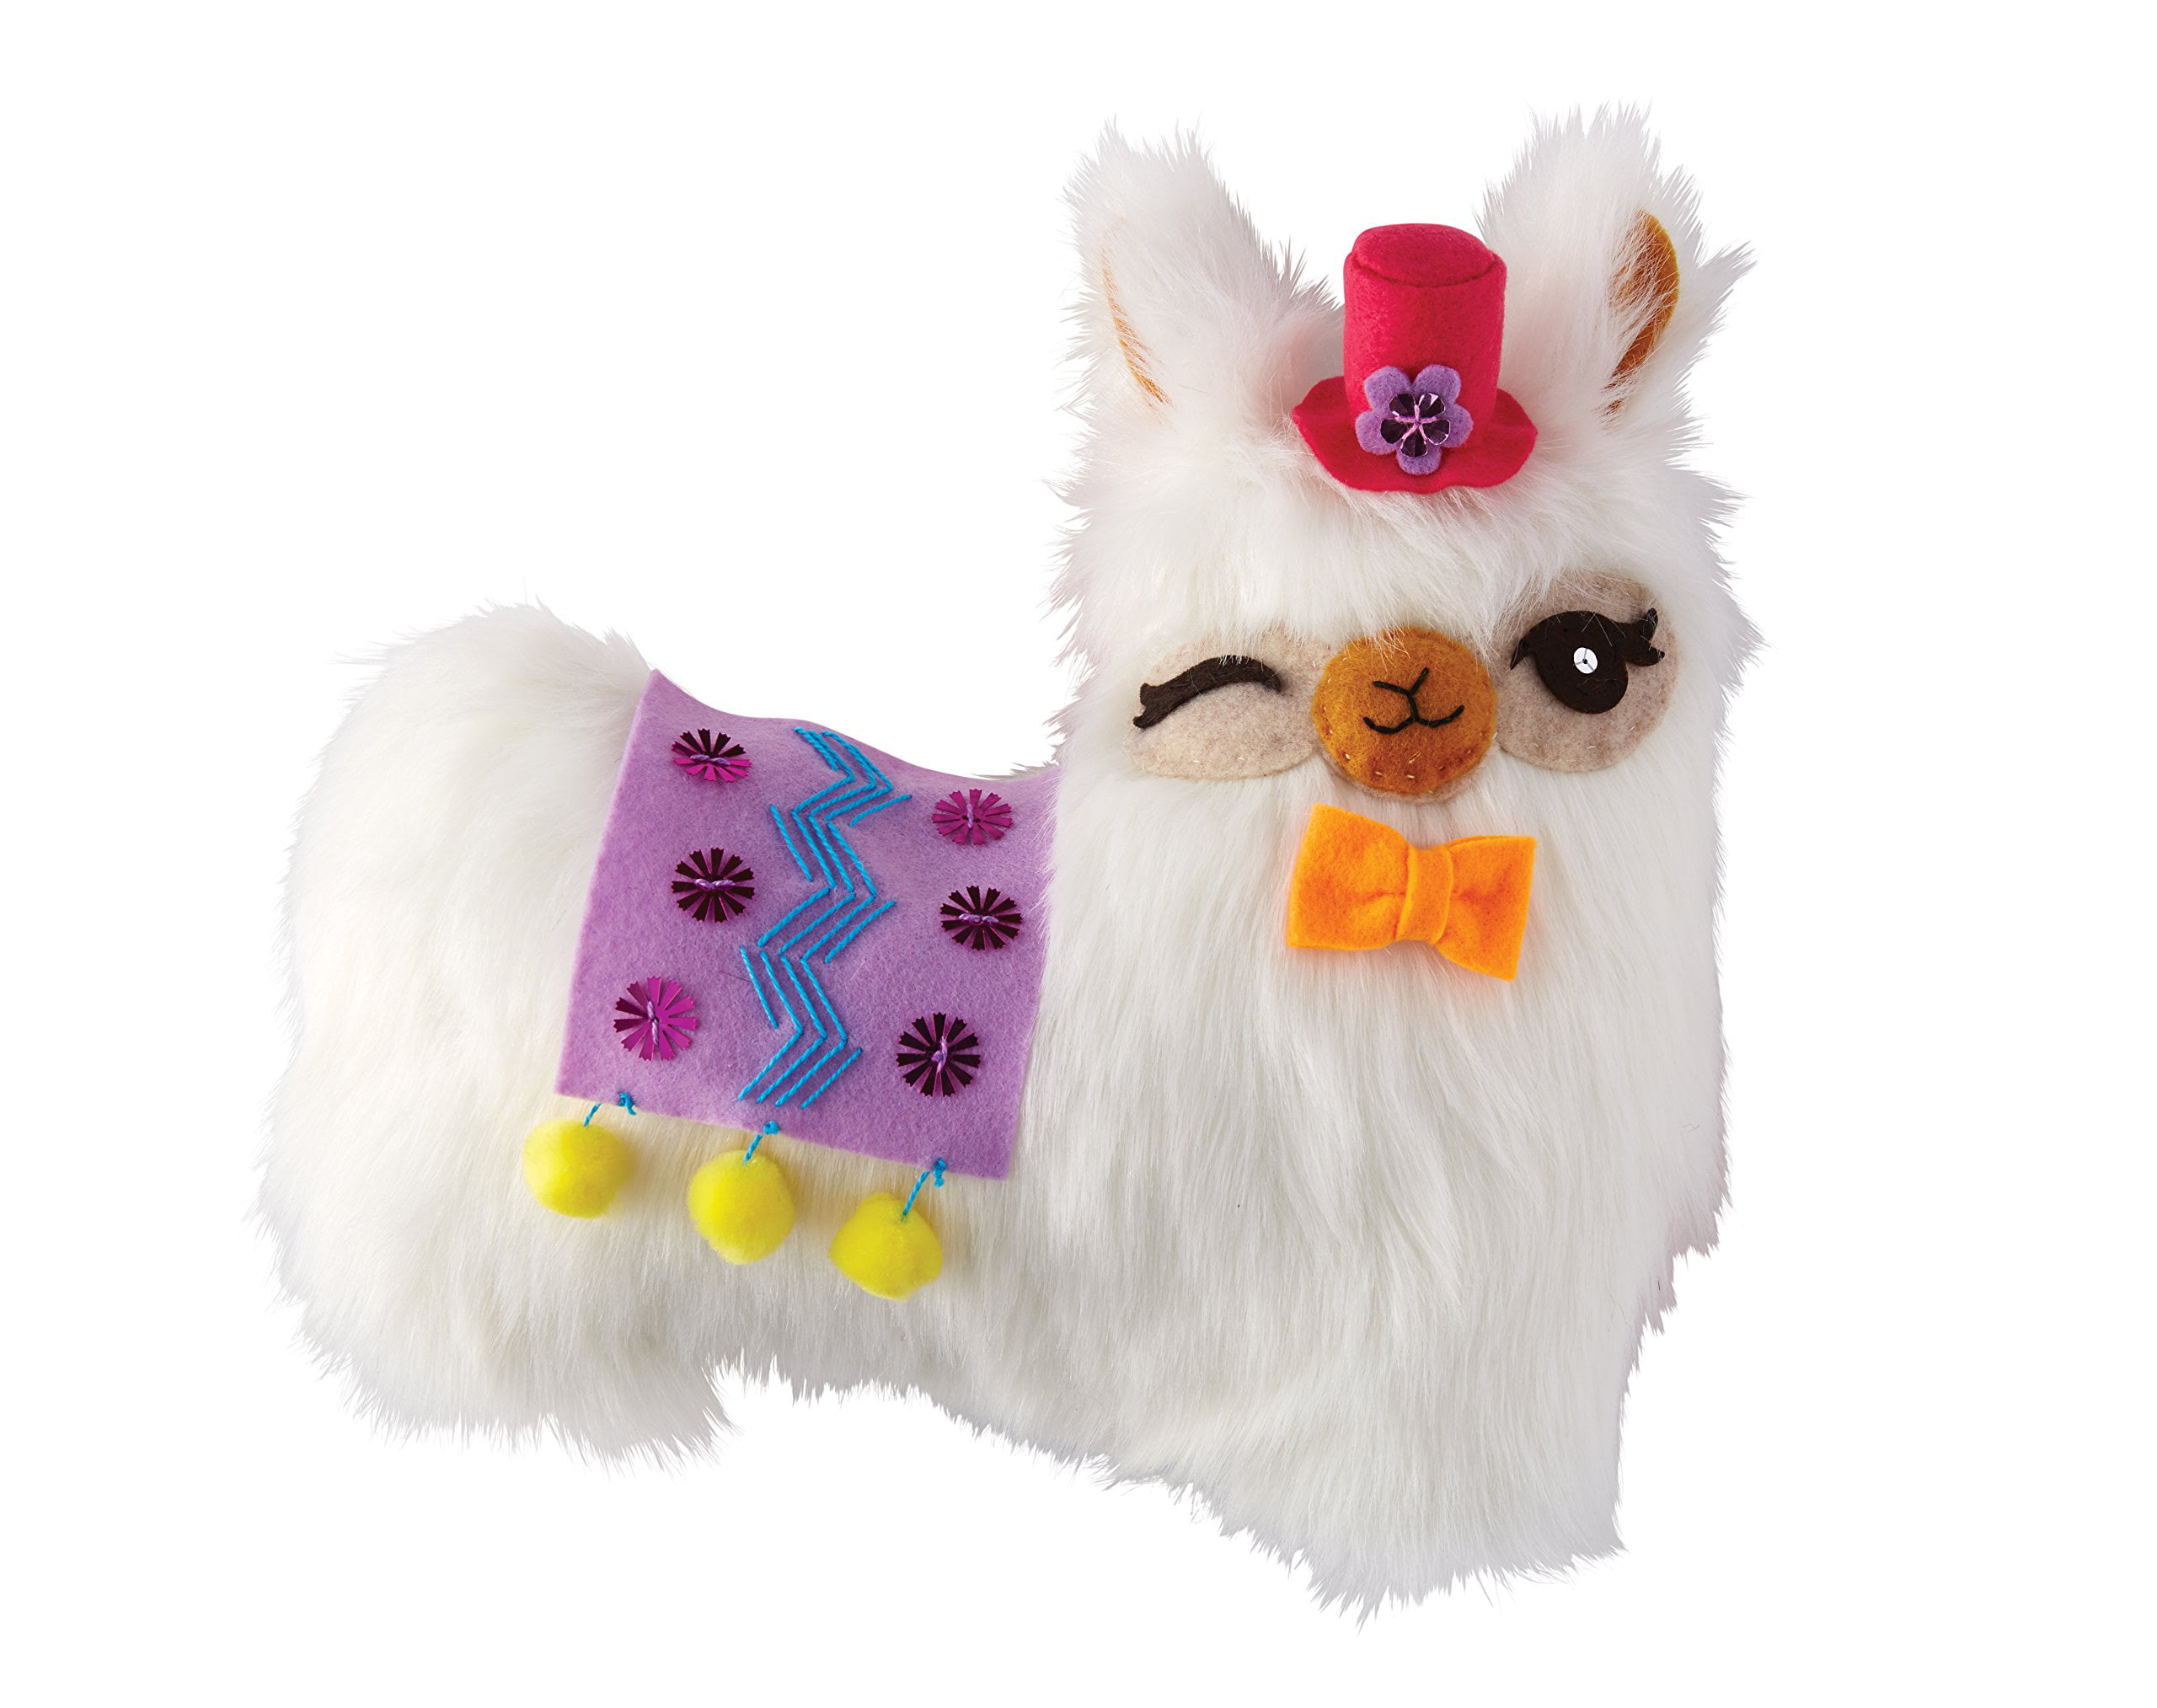 Klutz-Scholastic 159218 Sew Your Own Furry Llama Pillow Kit - Ages 